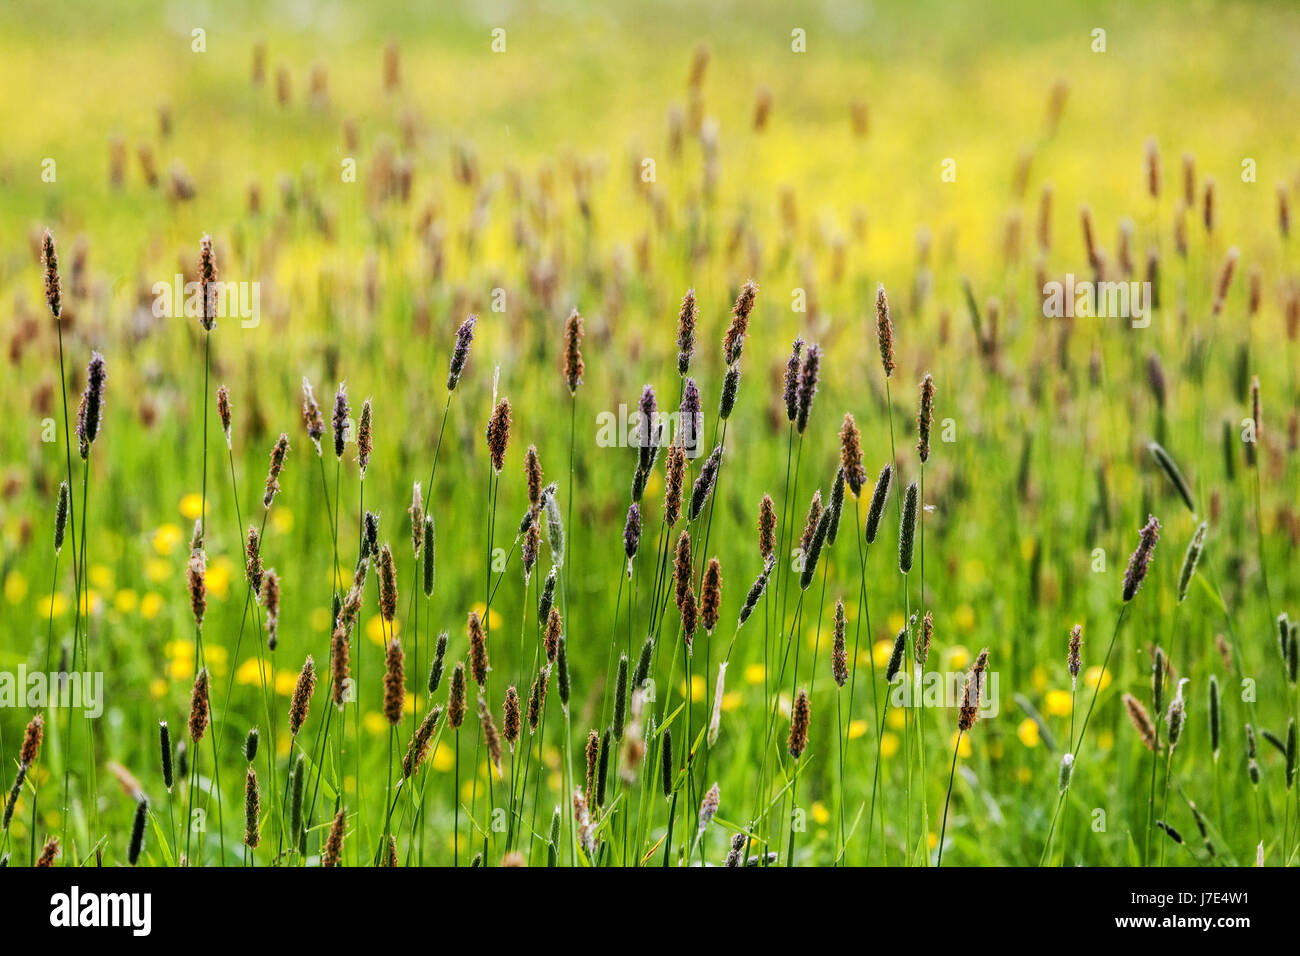 Meadow foxtail grass, Alopecurus pratensis, flowering in a colorful meadow European grass field Stock Photo